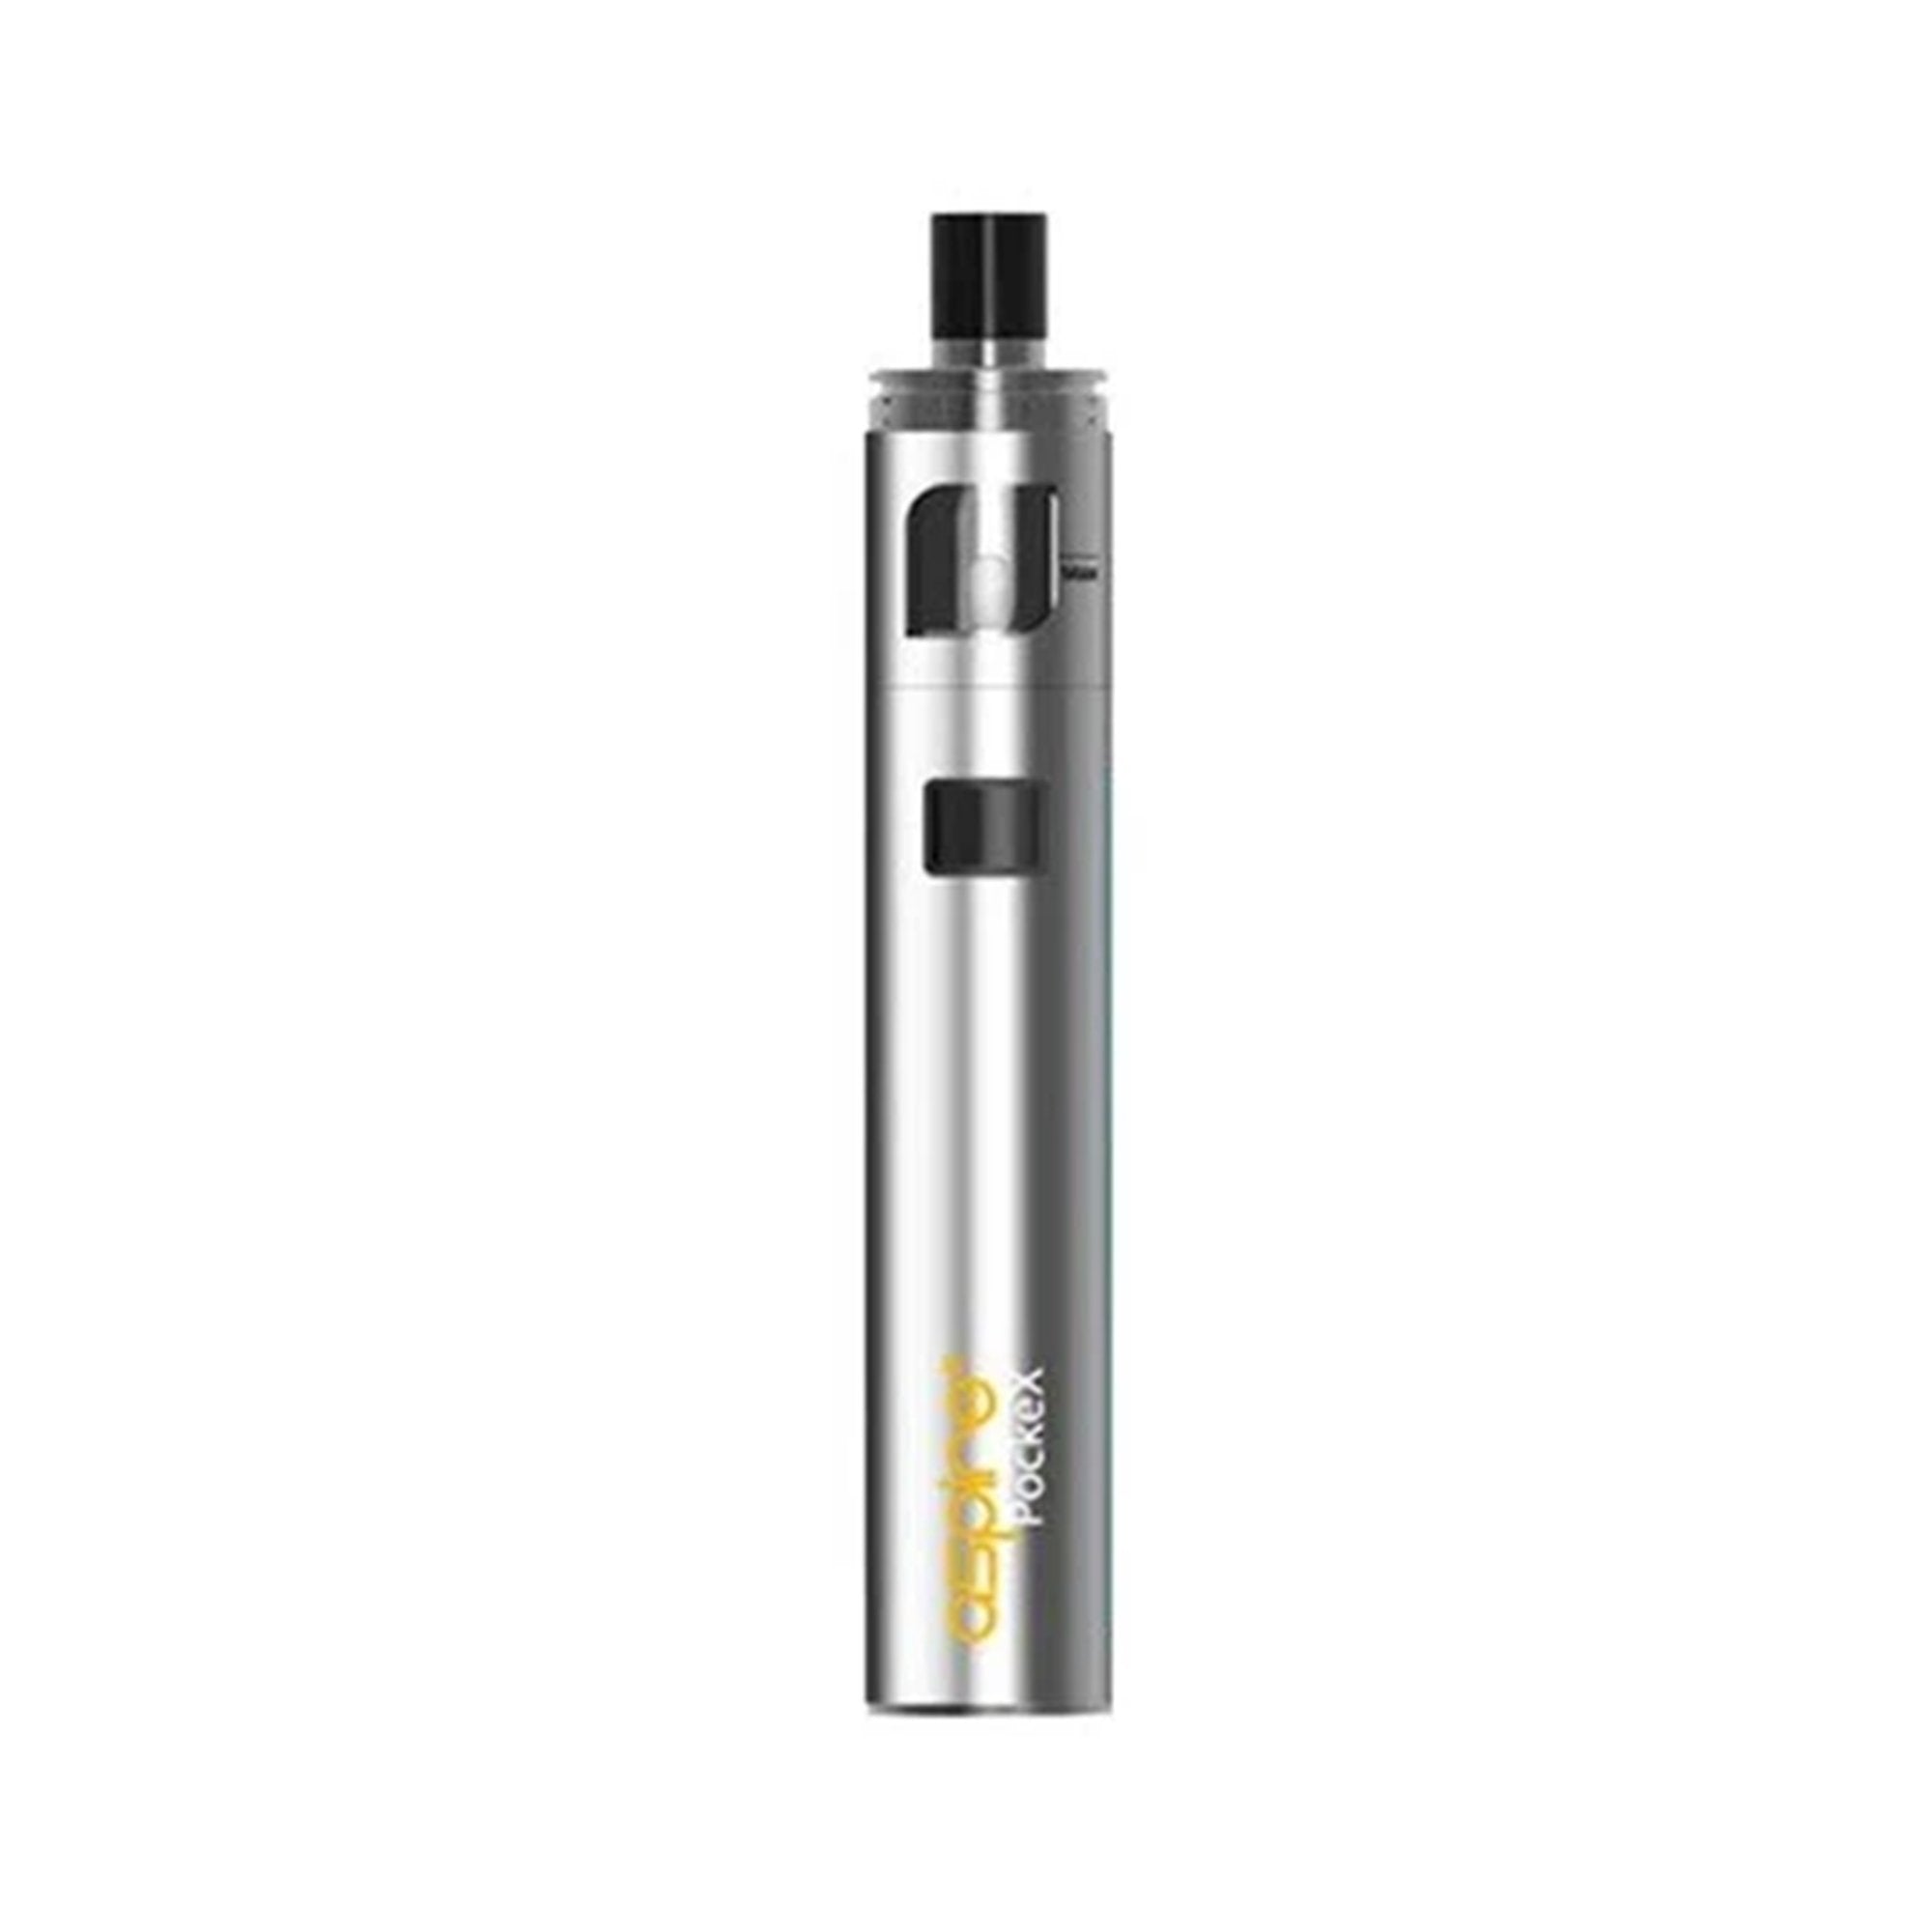 Aspire | PockeX AIO Kit | Wolfvapes - Wolfvapes.co.uk-Silver